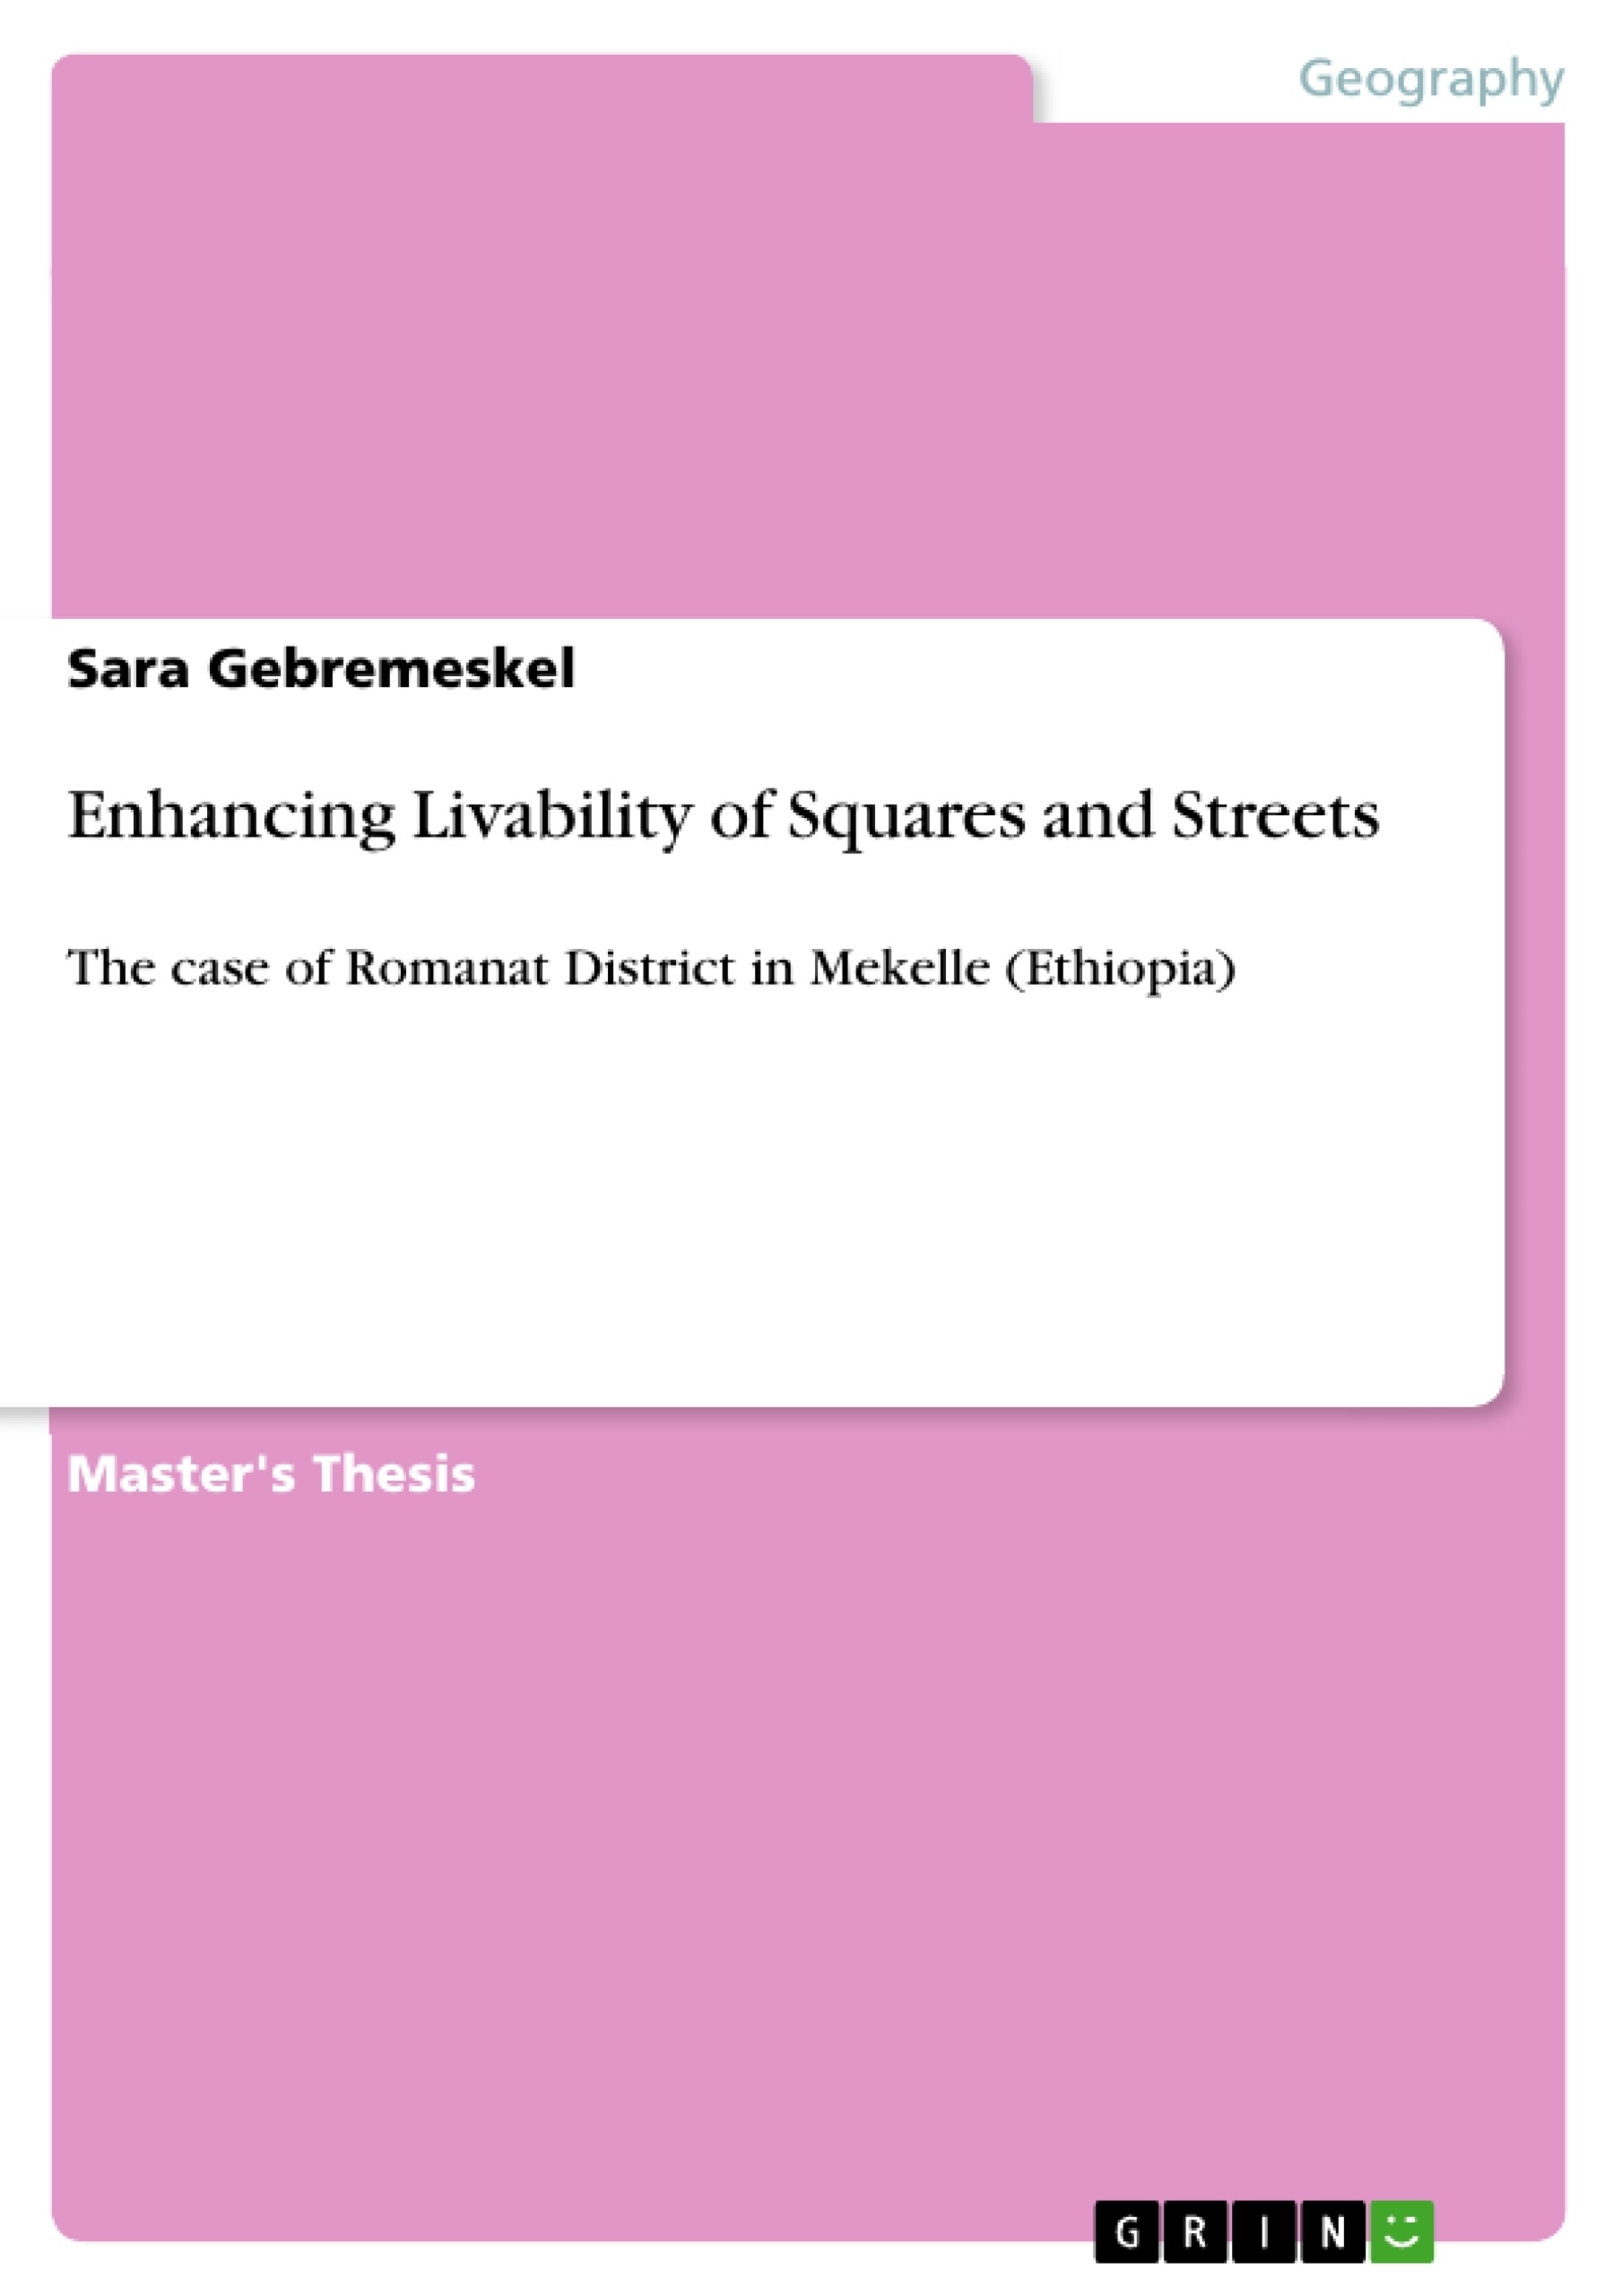 Title: Enhancing Livability of Squares and Streets